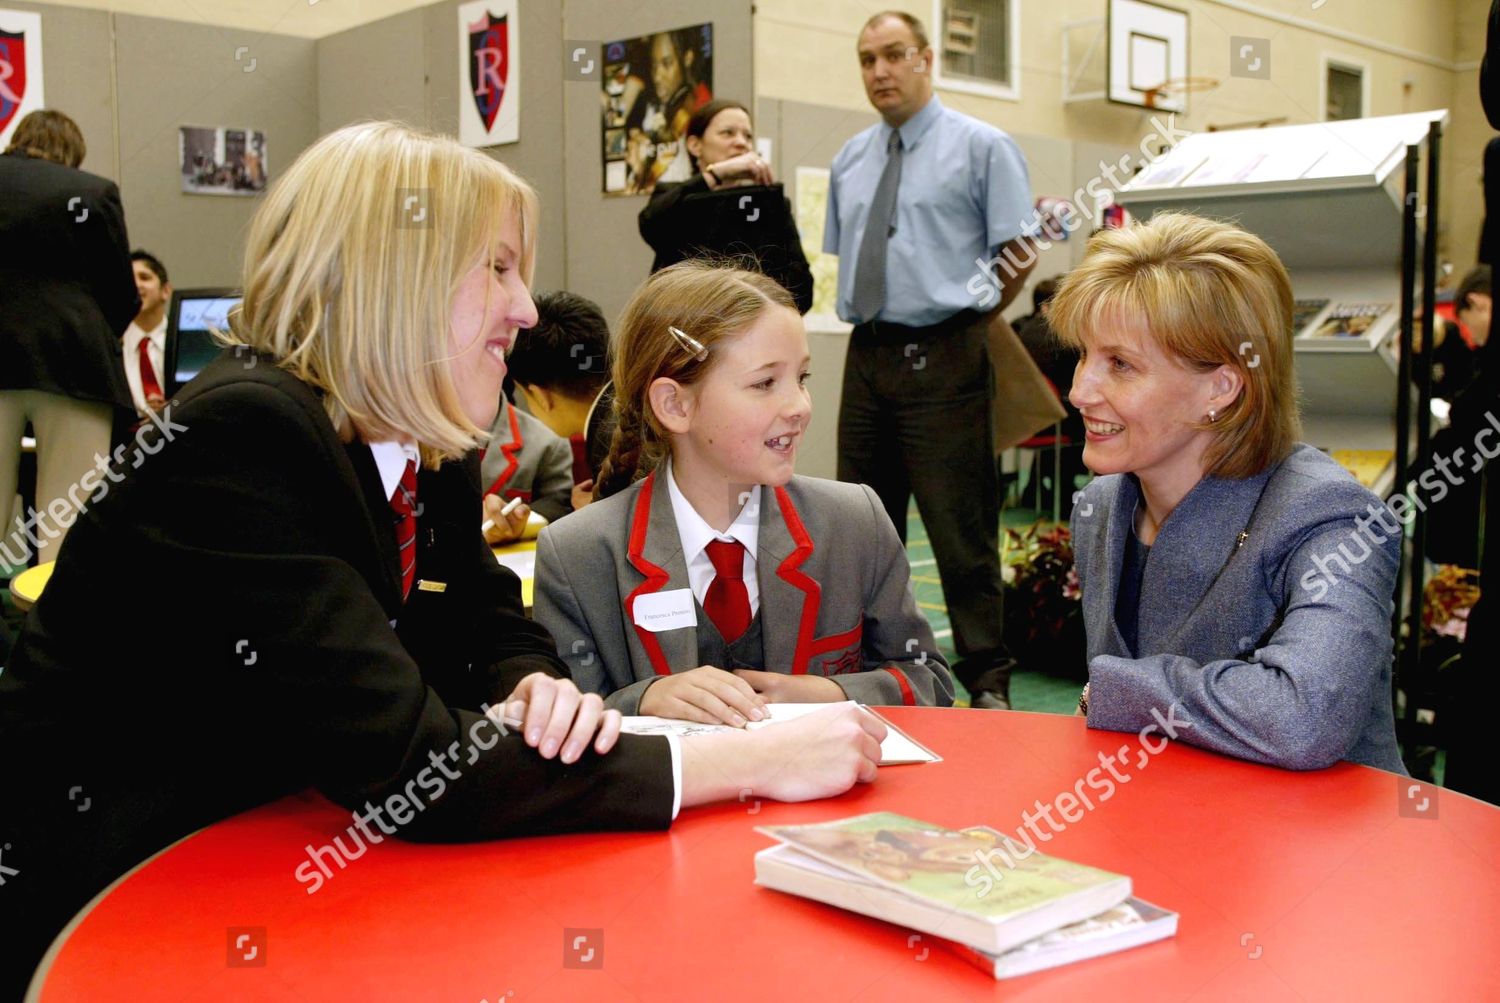 prince-edward-and-sophie-countess-of-wessex-visiting-rougemont-school-newport-wales-britain-shutterstock-editorial-415508f.jpg